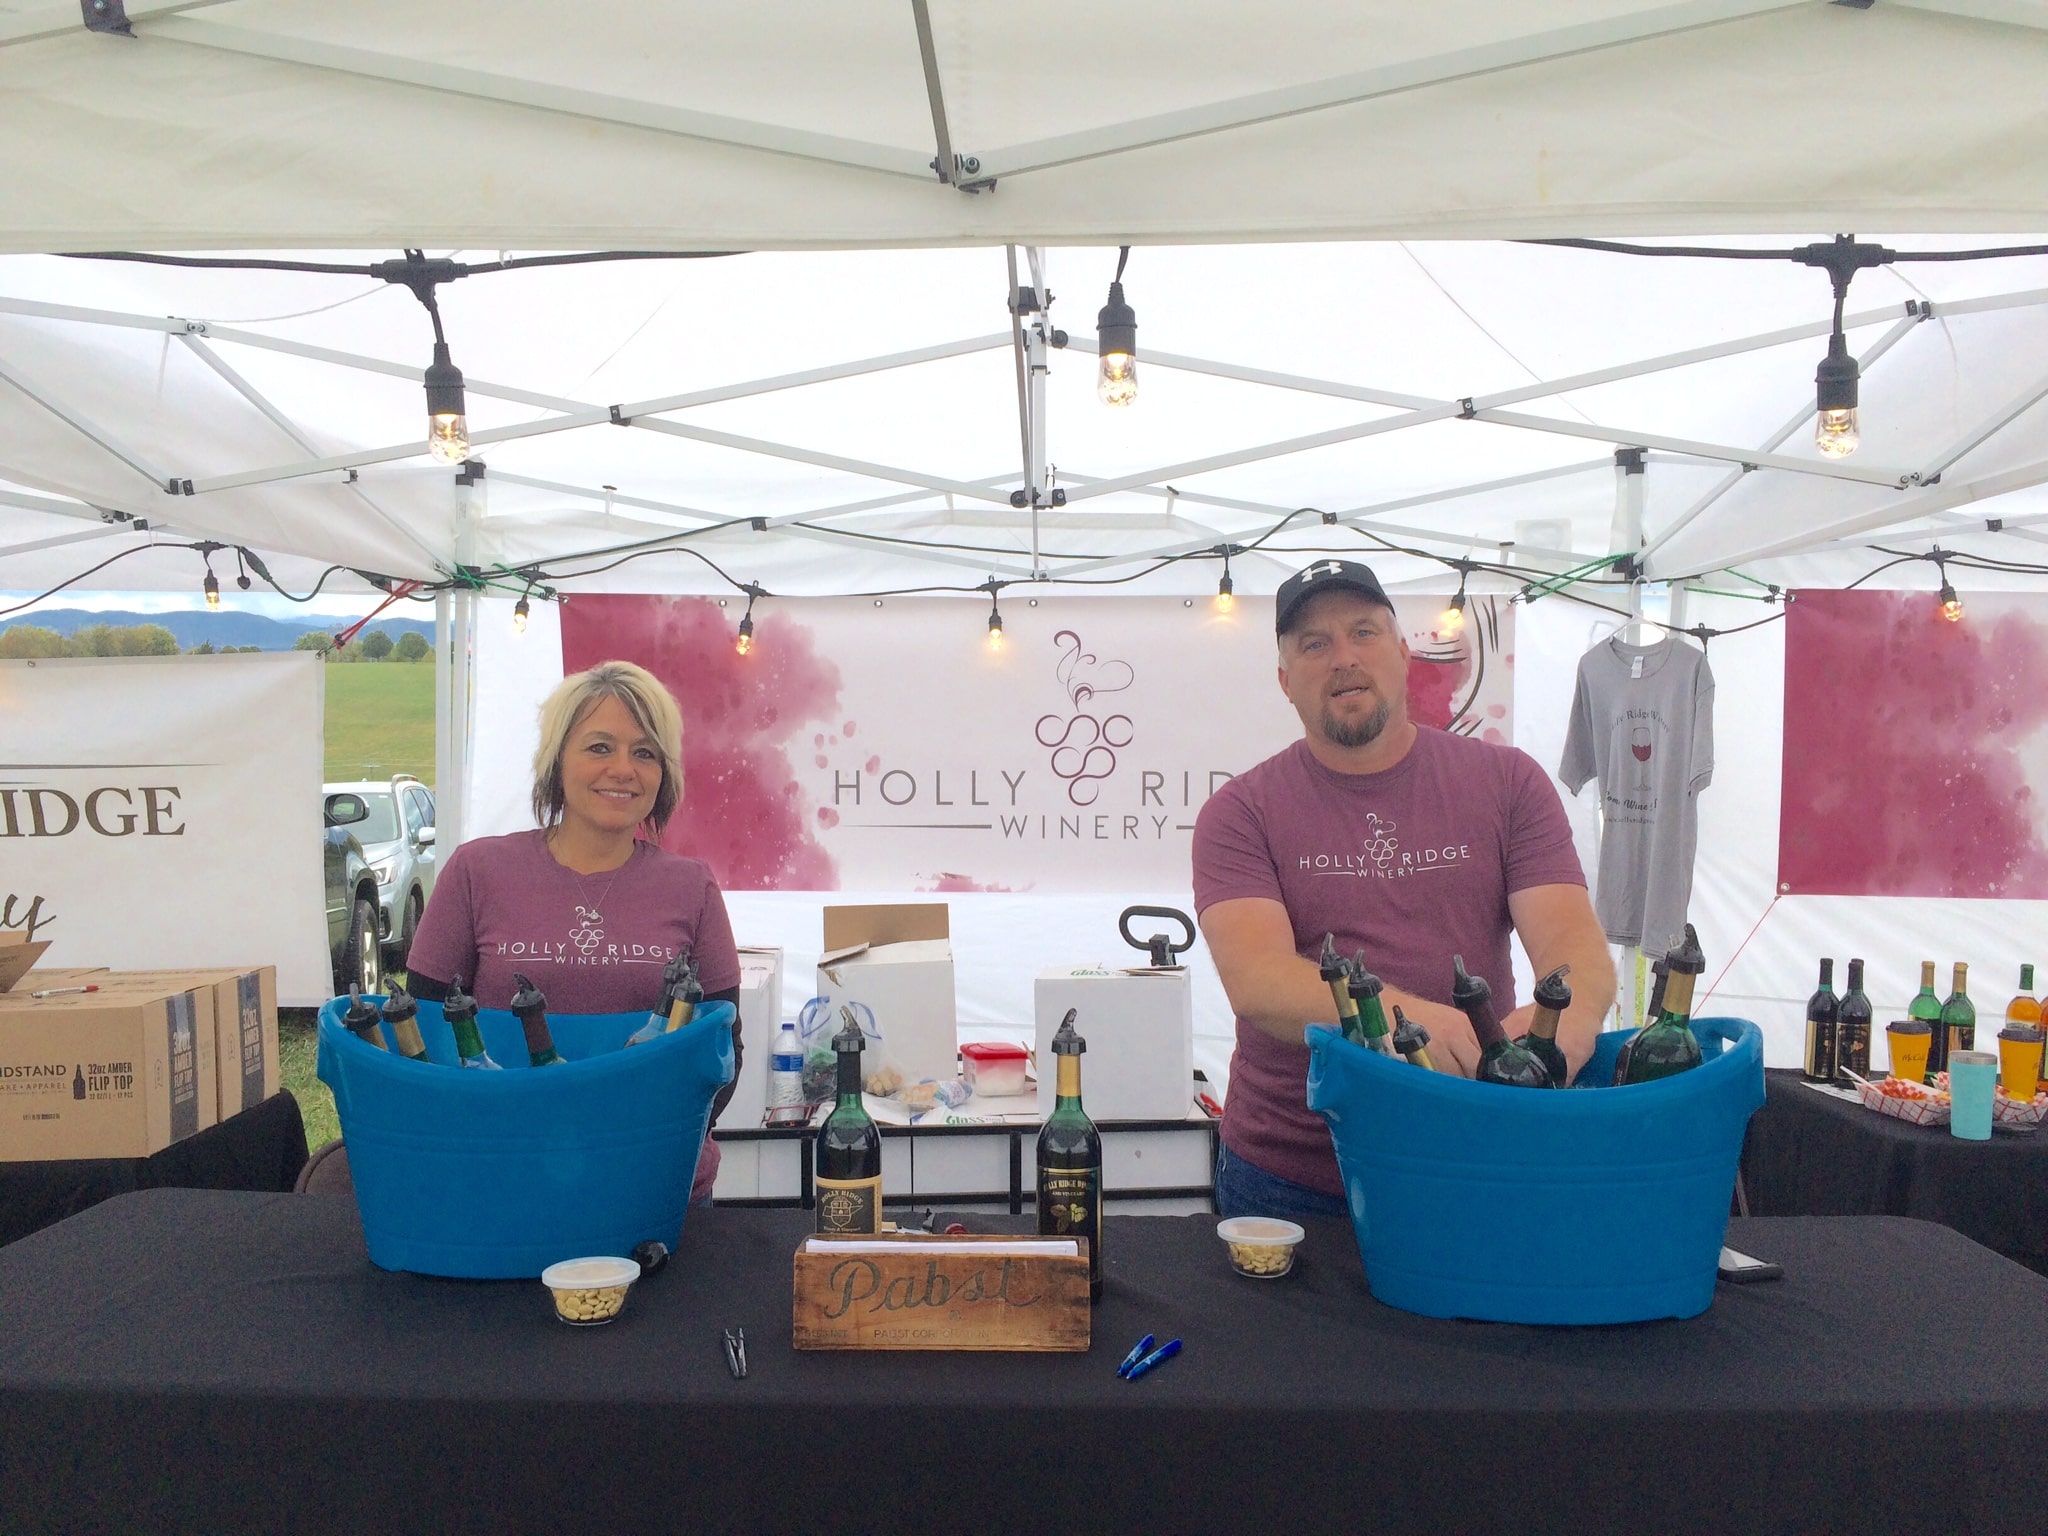 Holly Ridge Winery booth at wine festival